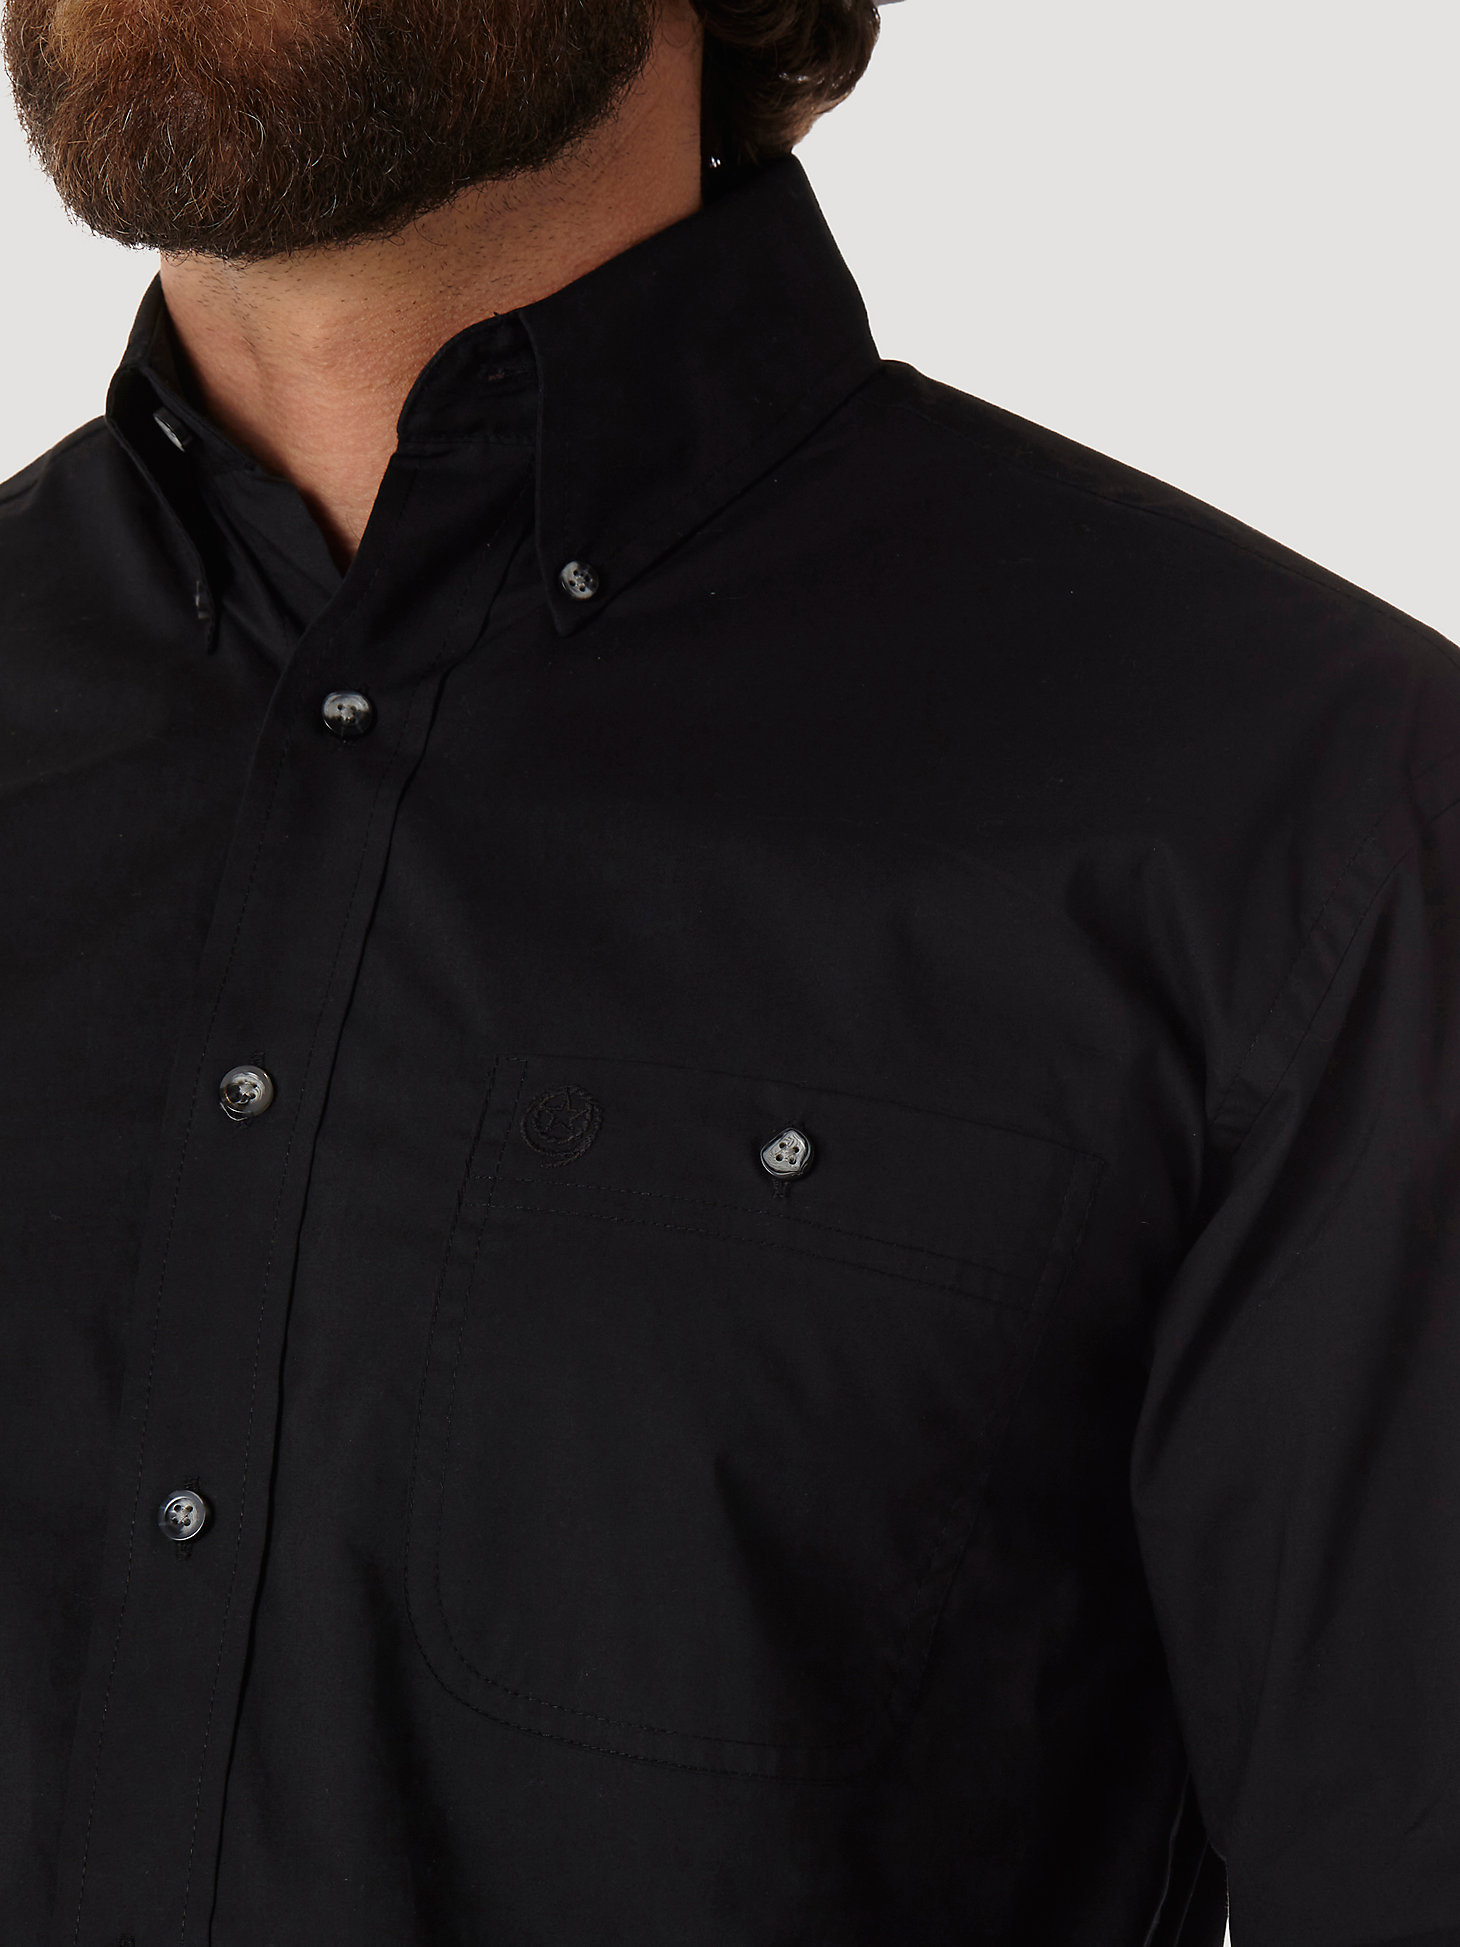 Men's George Strait Long Sleeve Button Down Solid Shirt in Black alternative view 2